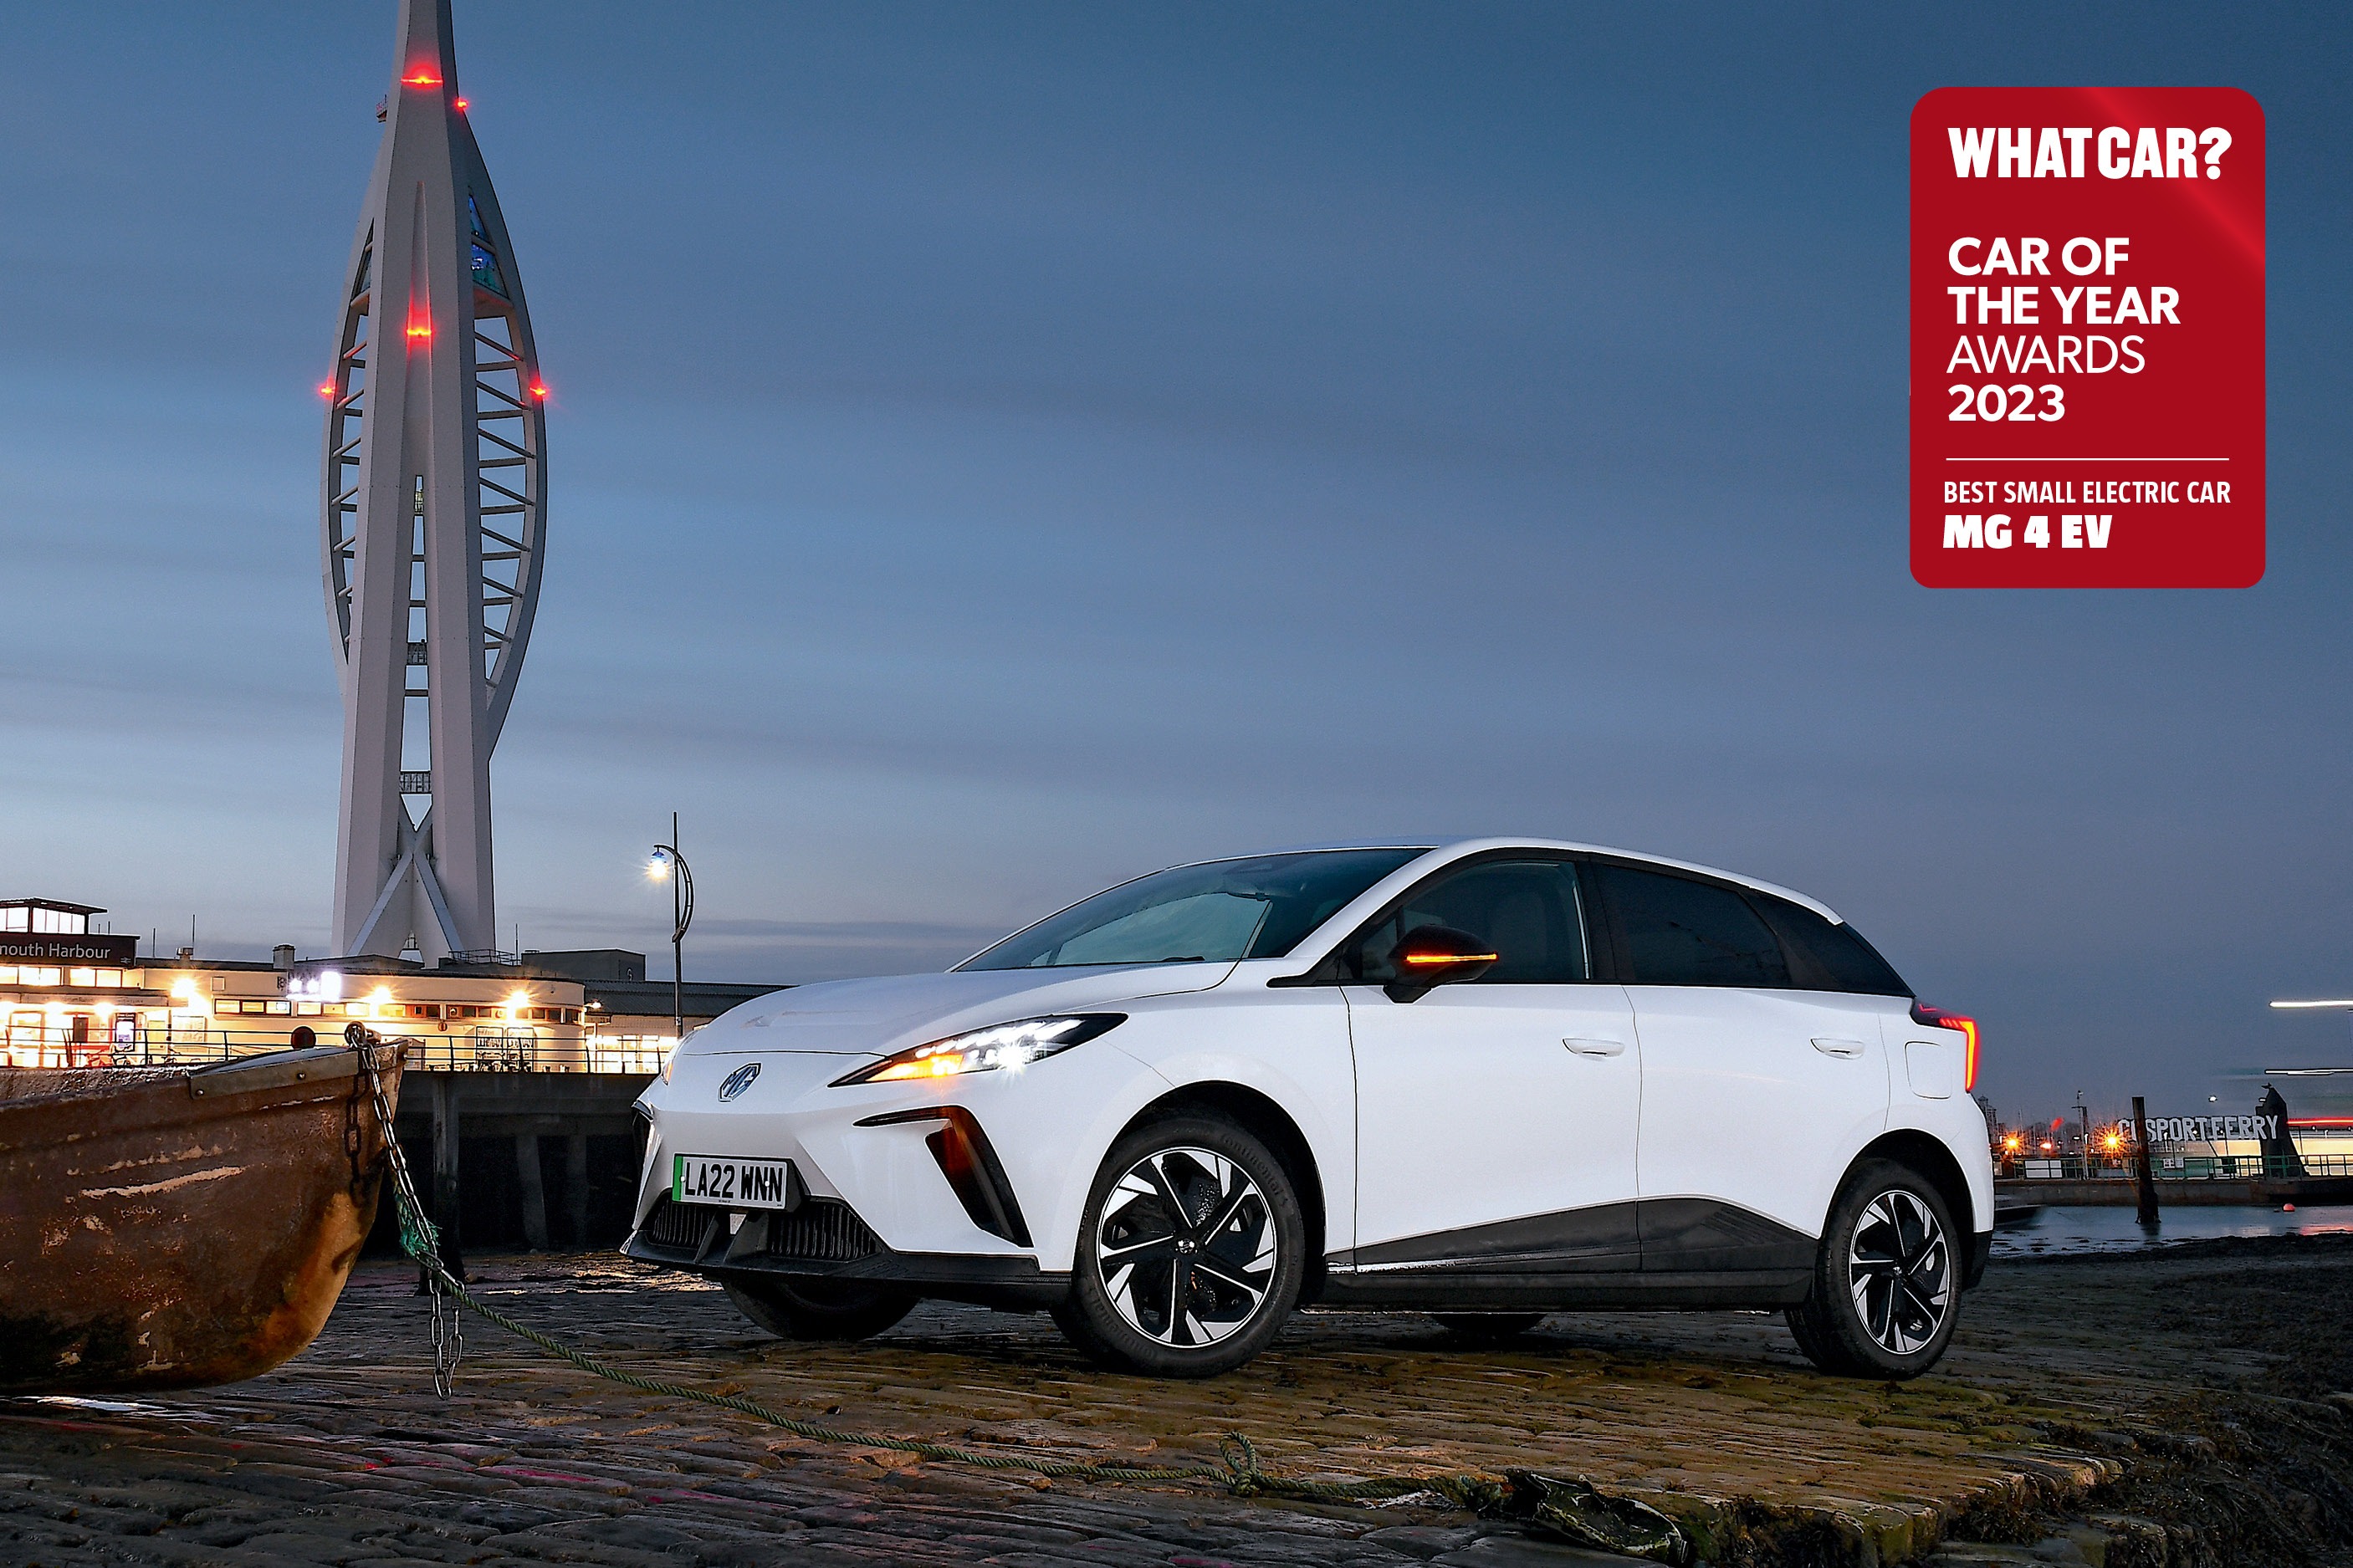 MG4 named ‘Best Small EV’ at What Car? Awards 2023